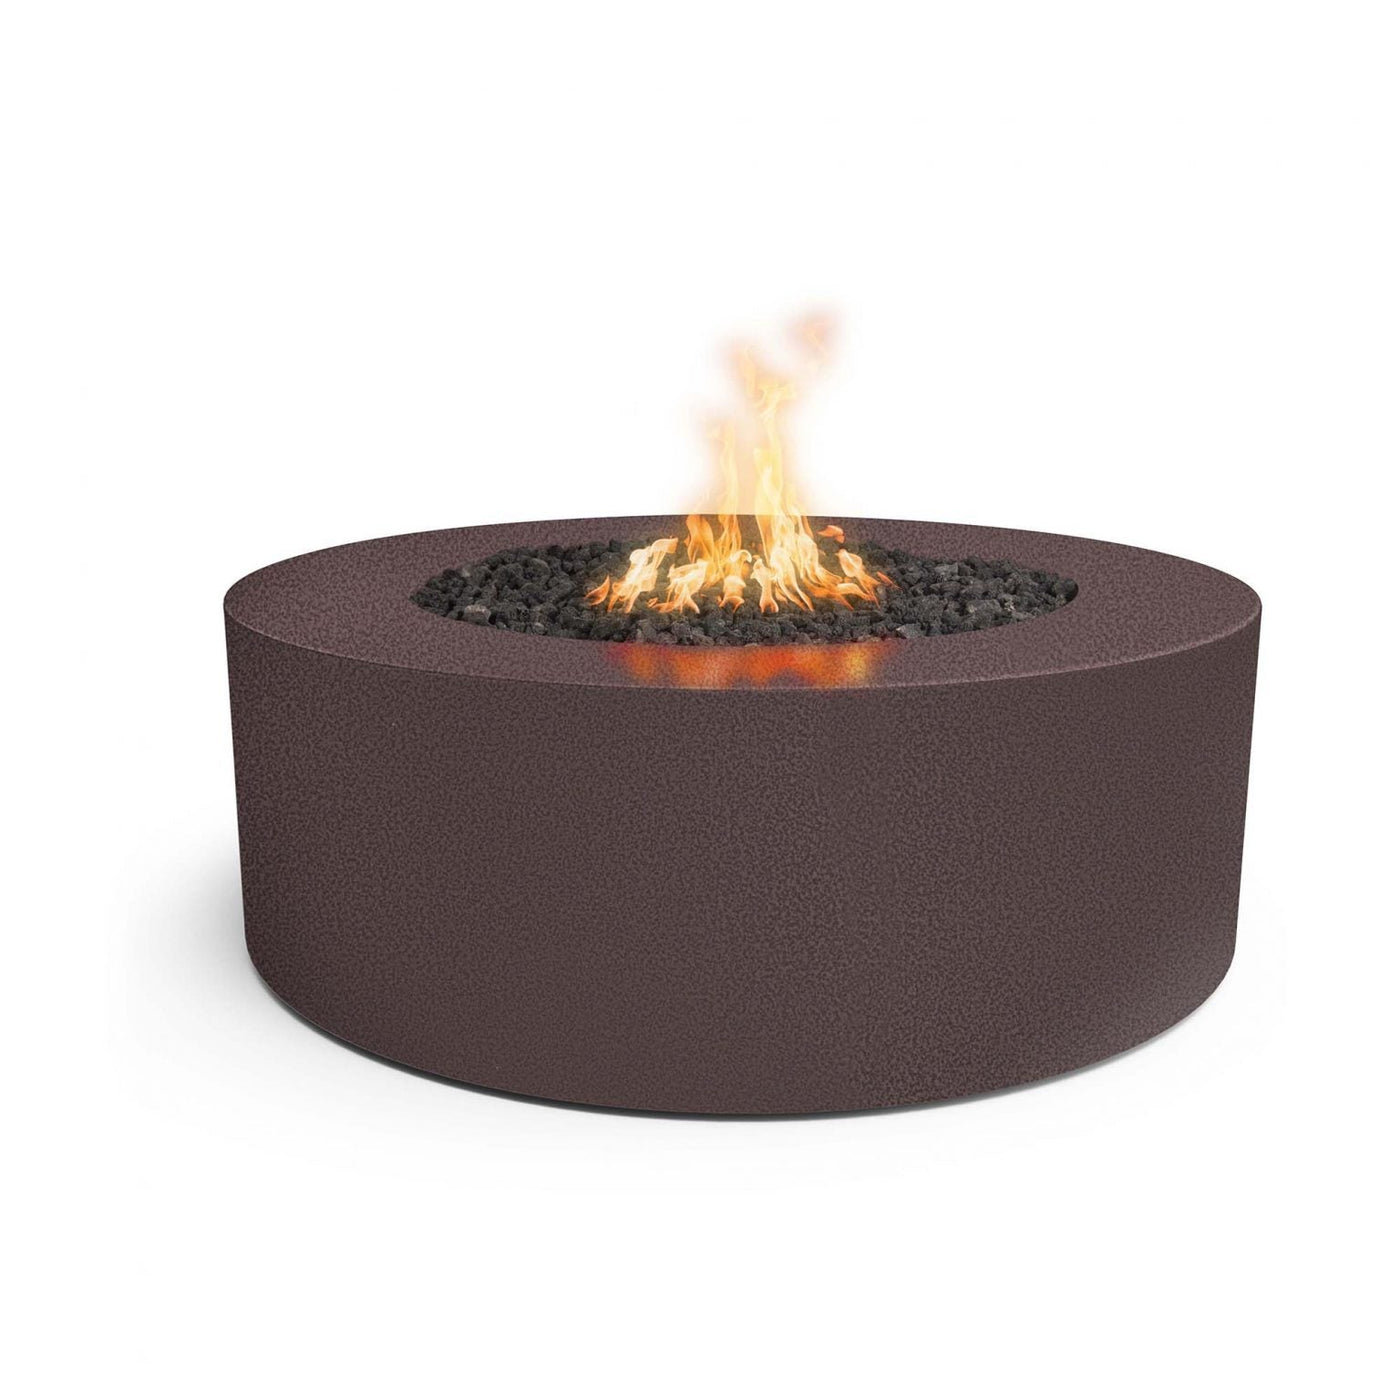 The Outdoor Plus 18" Tall Unity Powder Coated Metal Fire Pit